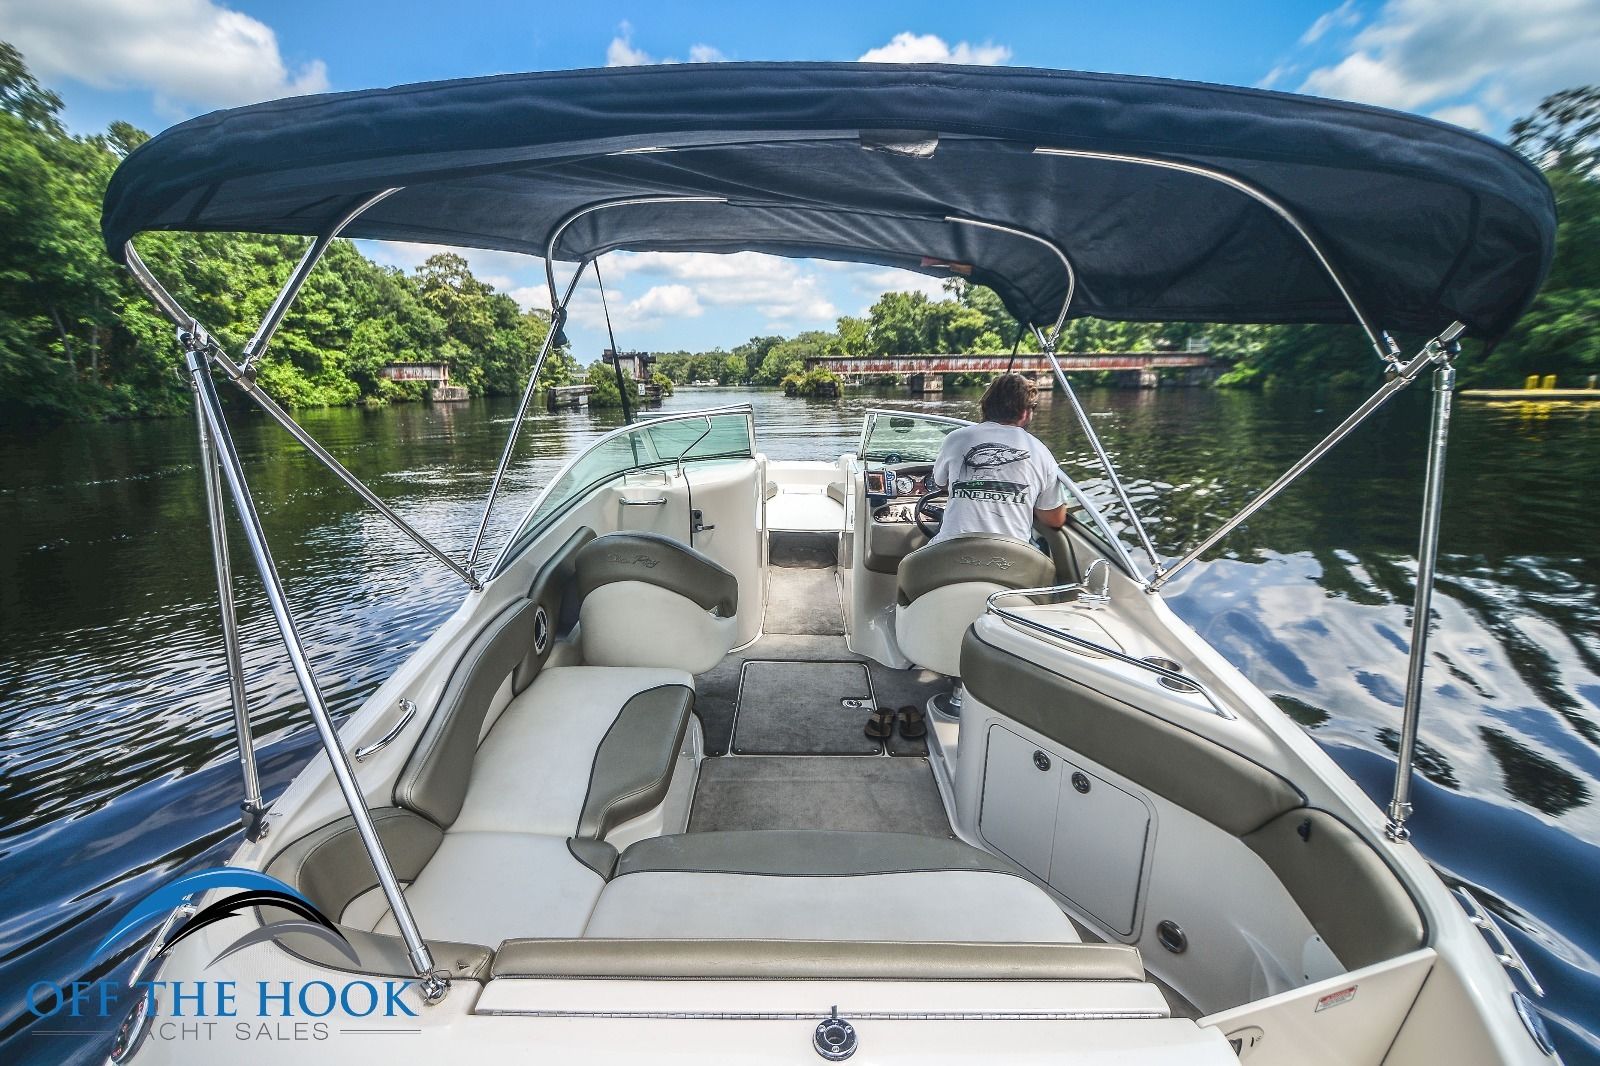 Sea Ray 240 Sundeck 2006 for sale for $26,500 - Boats-from 